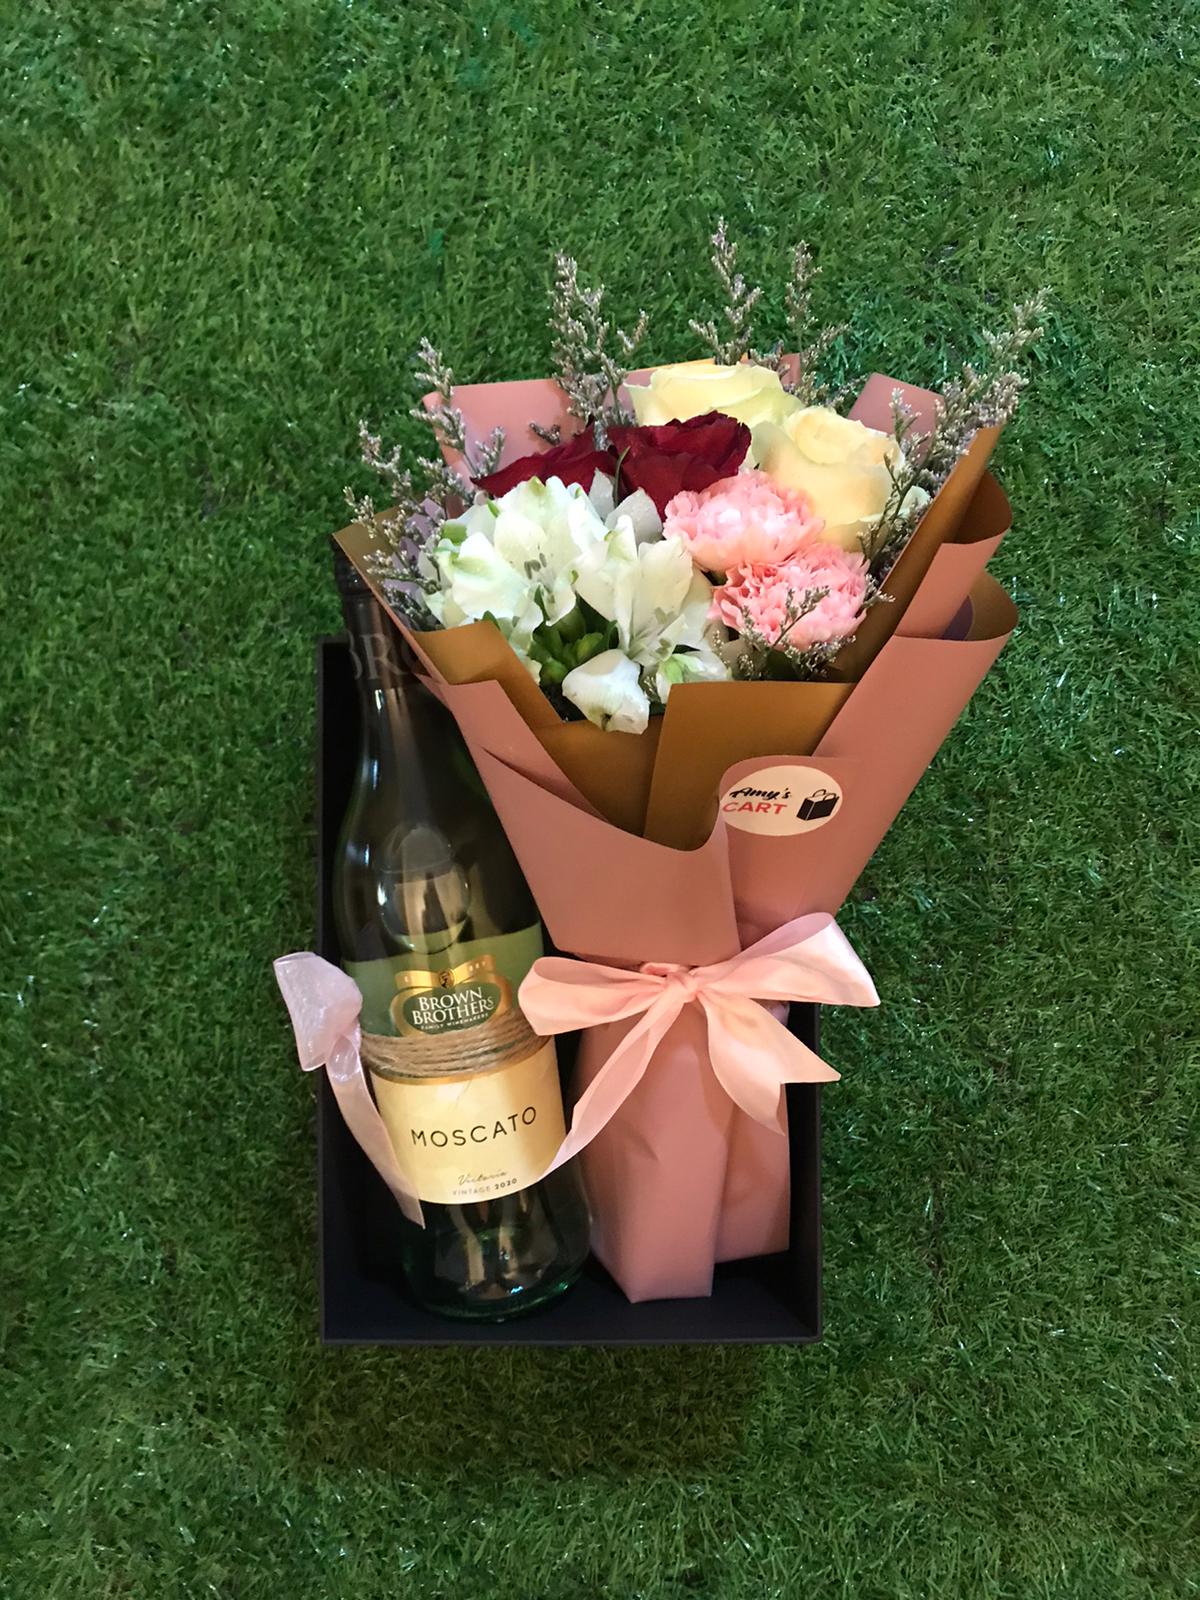 The Moscato Floral Gift Set